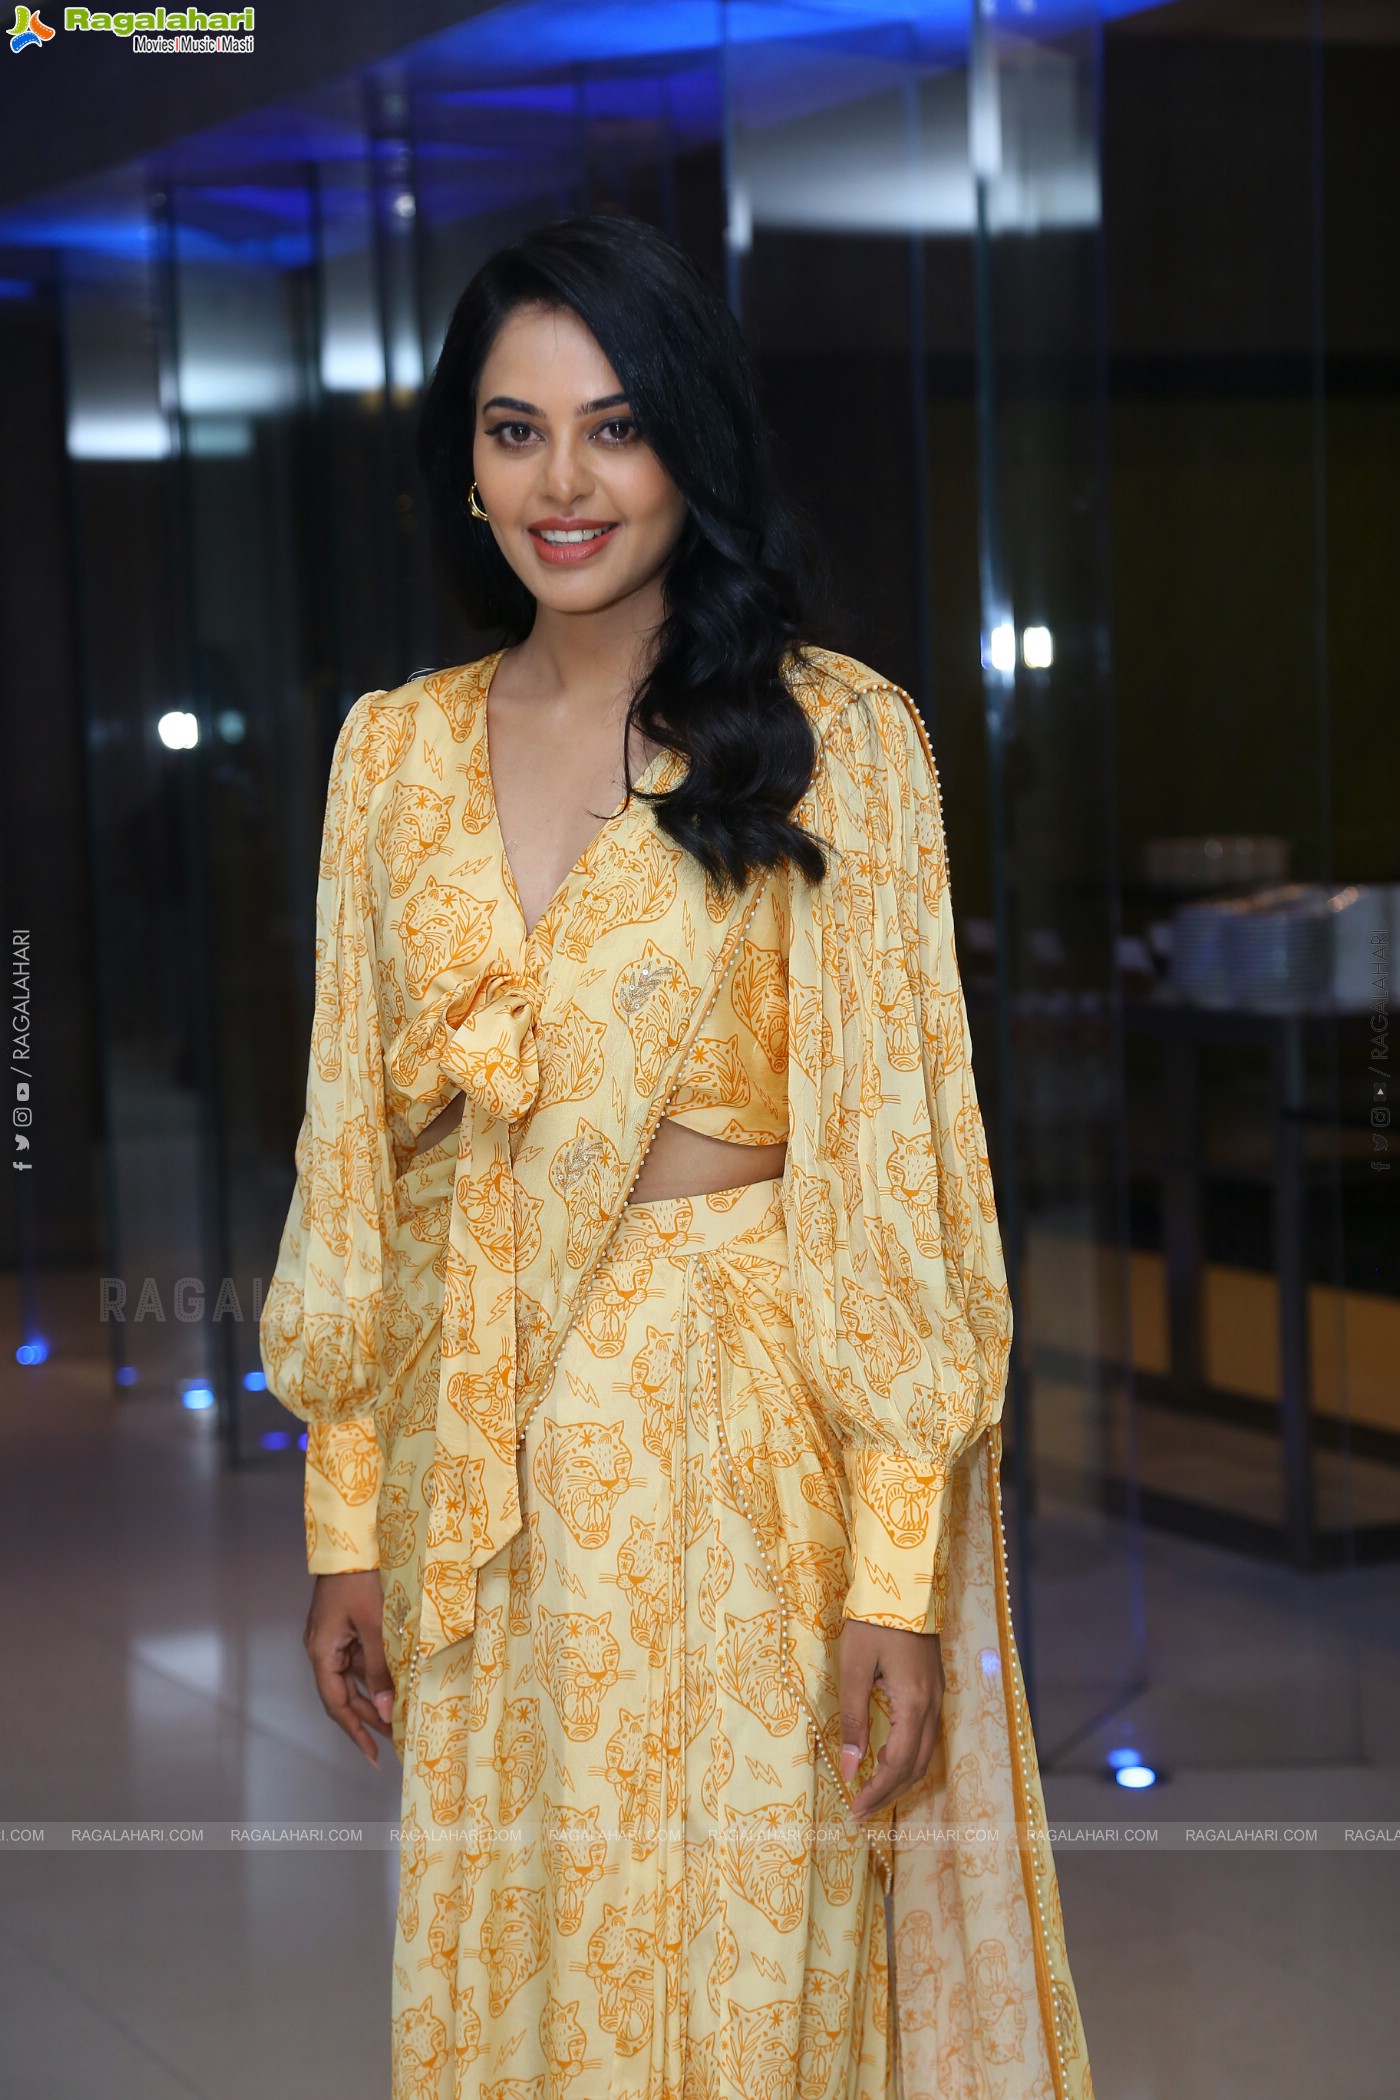 Bindu Madhavi at Anger Tales Pre-Release Event, HD Photo Gallery